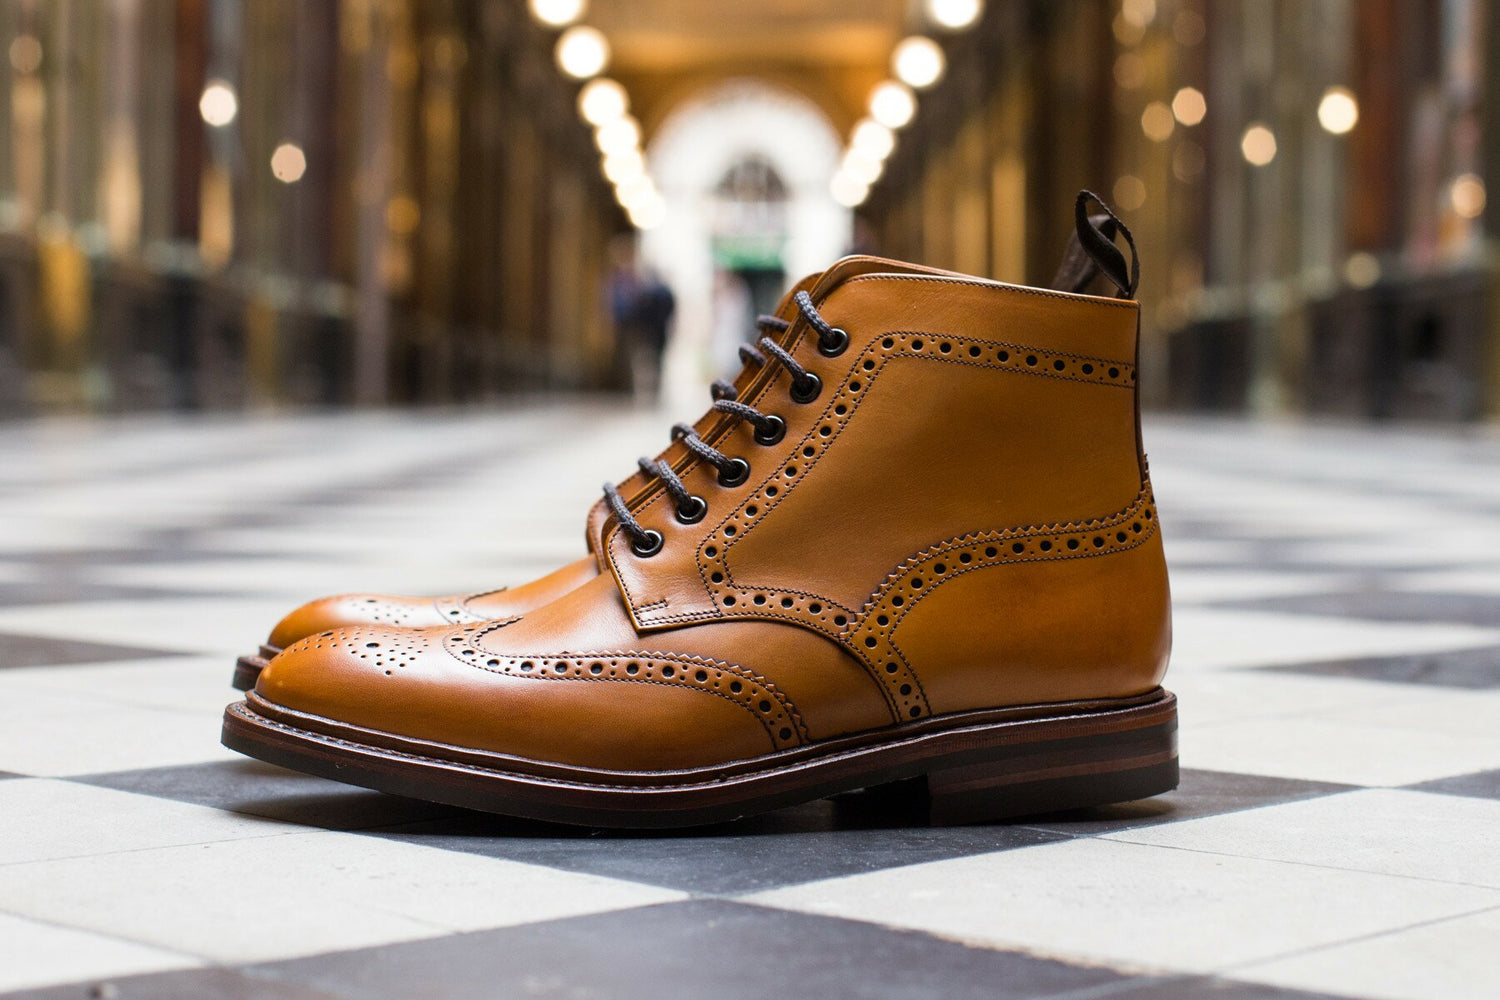 Loake - Boots cuir tan semelle gomme cousue goodyear